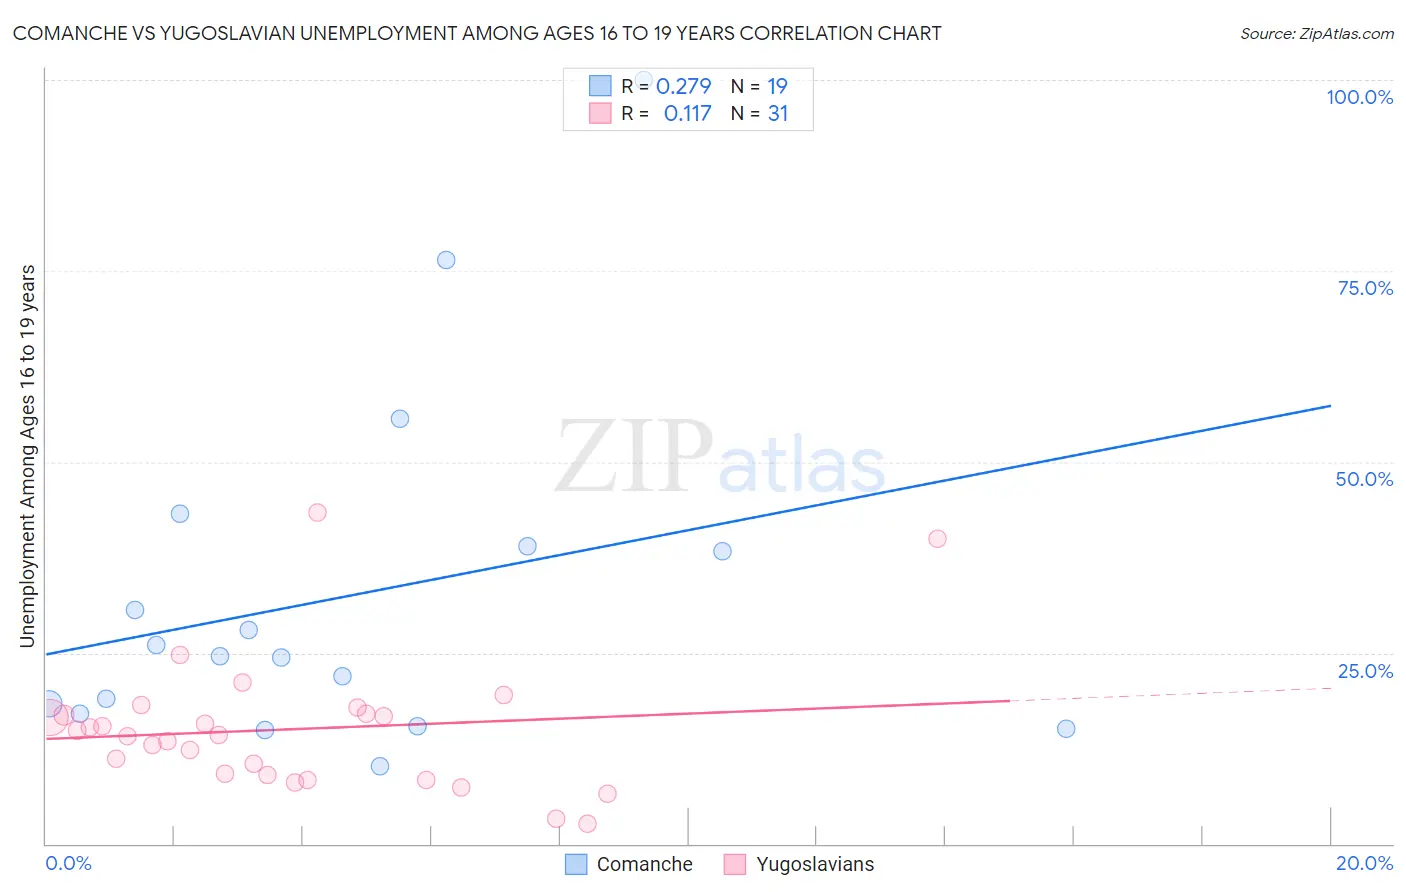 Comanche vs Yugoslavian Unemployment Among Ages 16 to 19 years